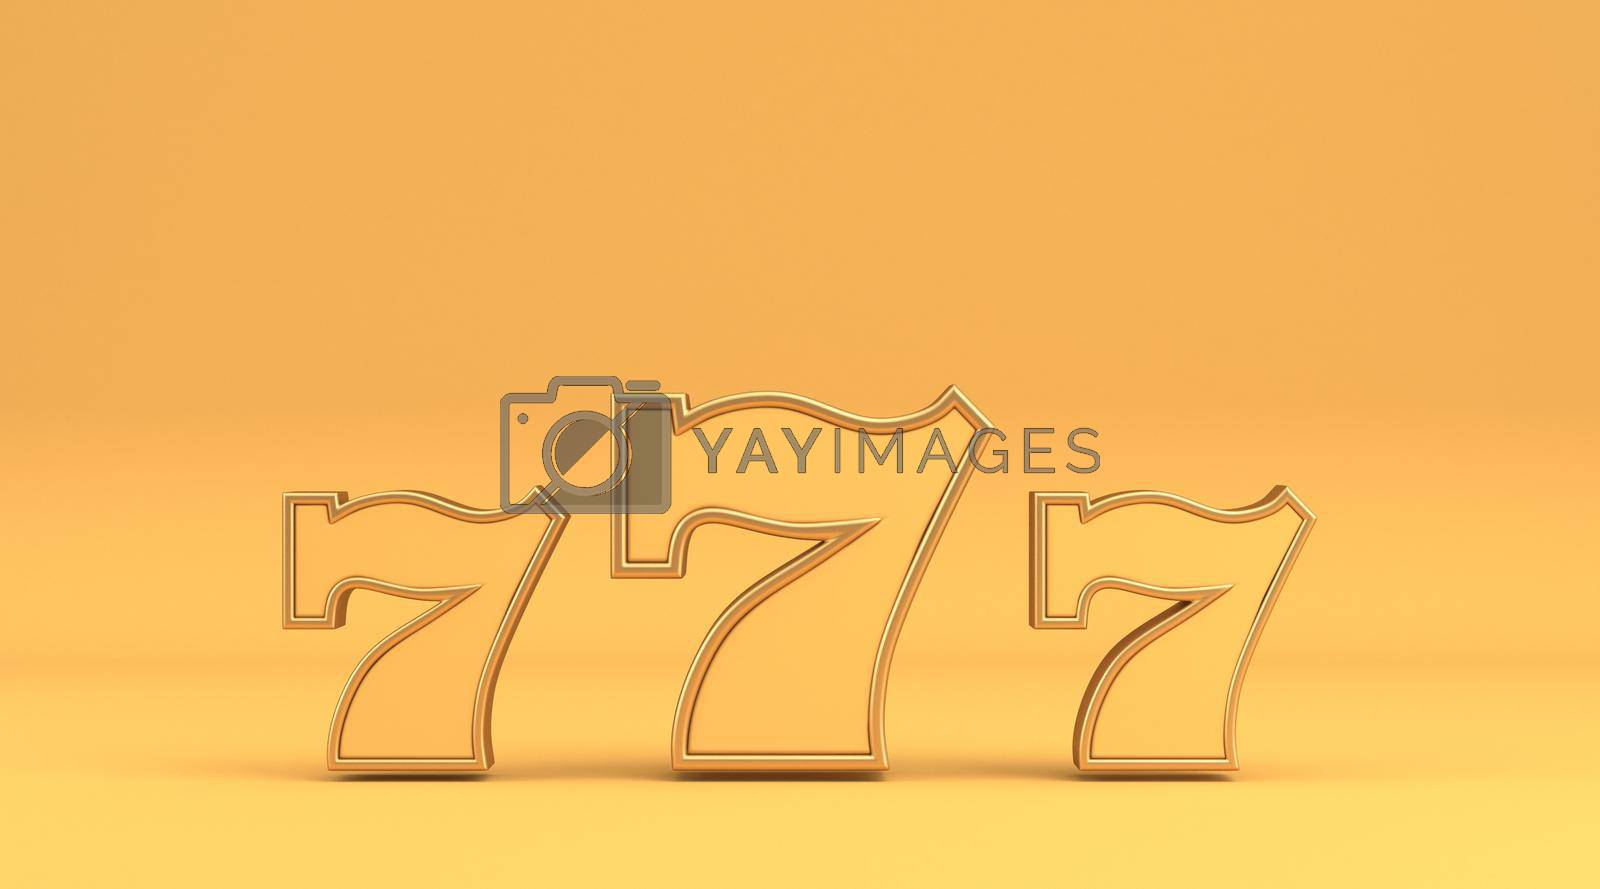 Yellow 777 sign 3D rendering illustration isolated on yellow background